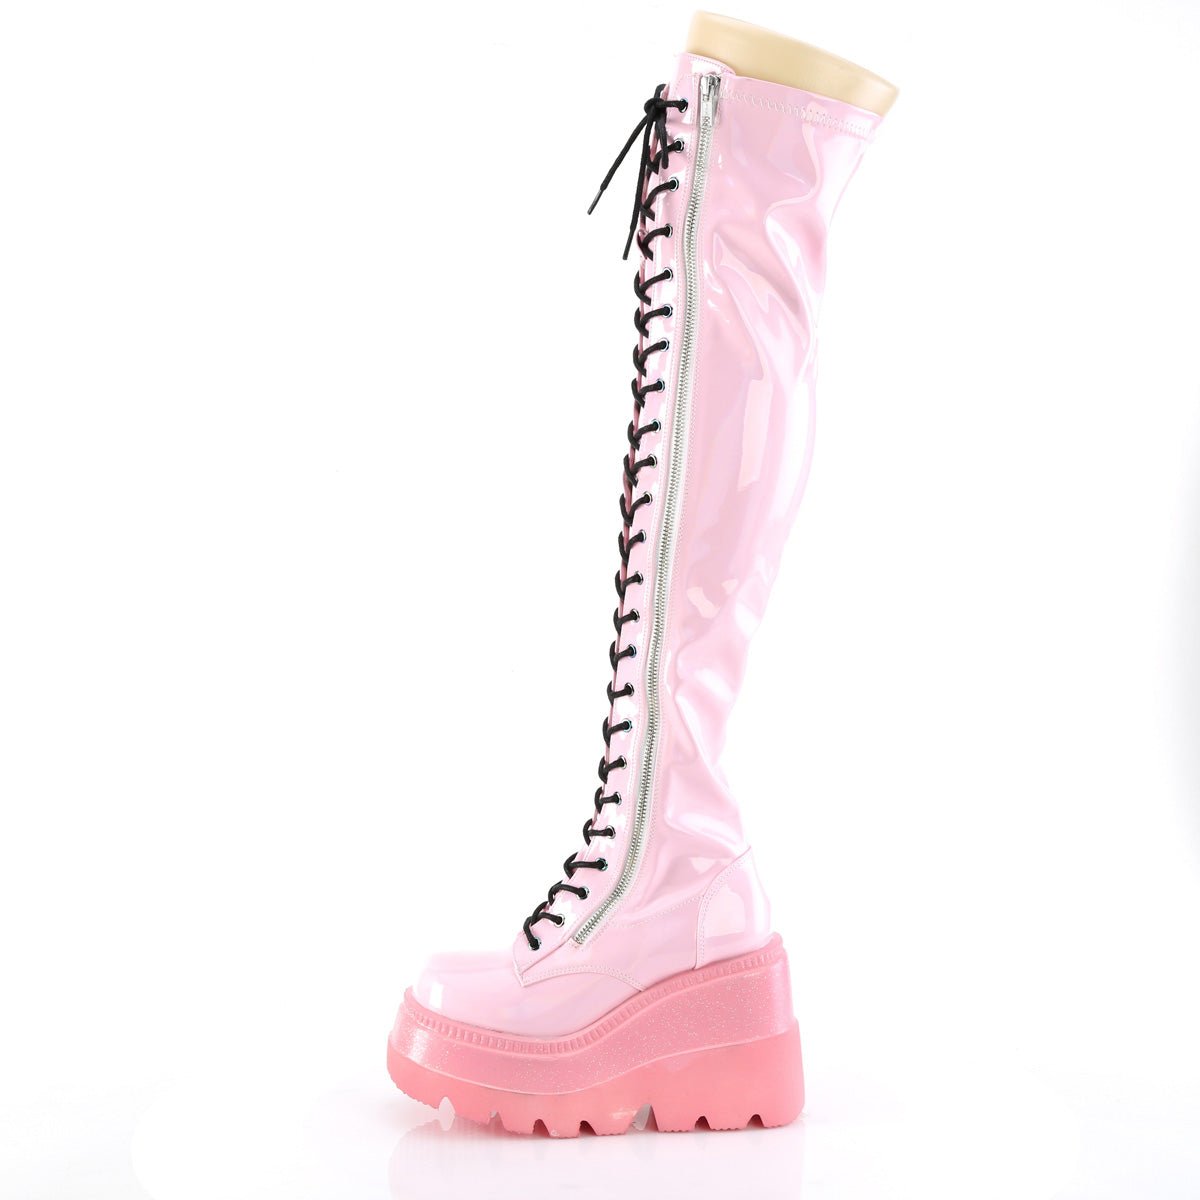 Too Fast | Demonia Shaker 374 1 | Baby Pink Hologram Stretch Patent Leather Women&#39;s Over The Knee Boots